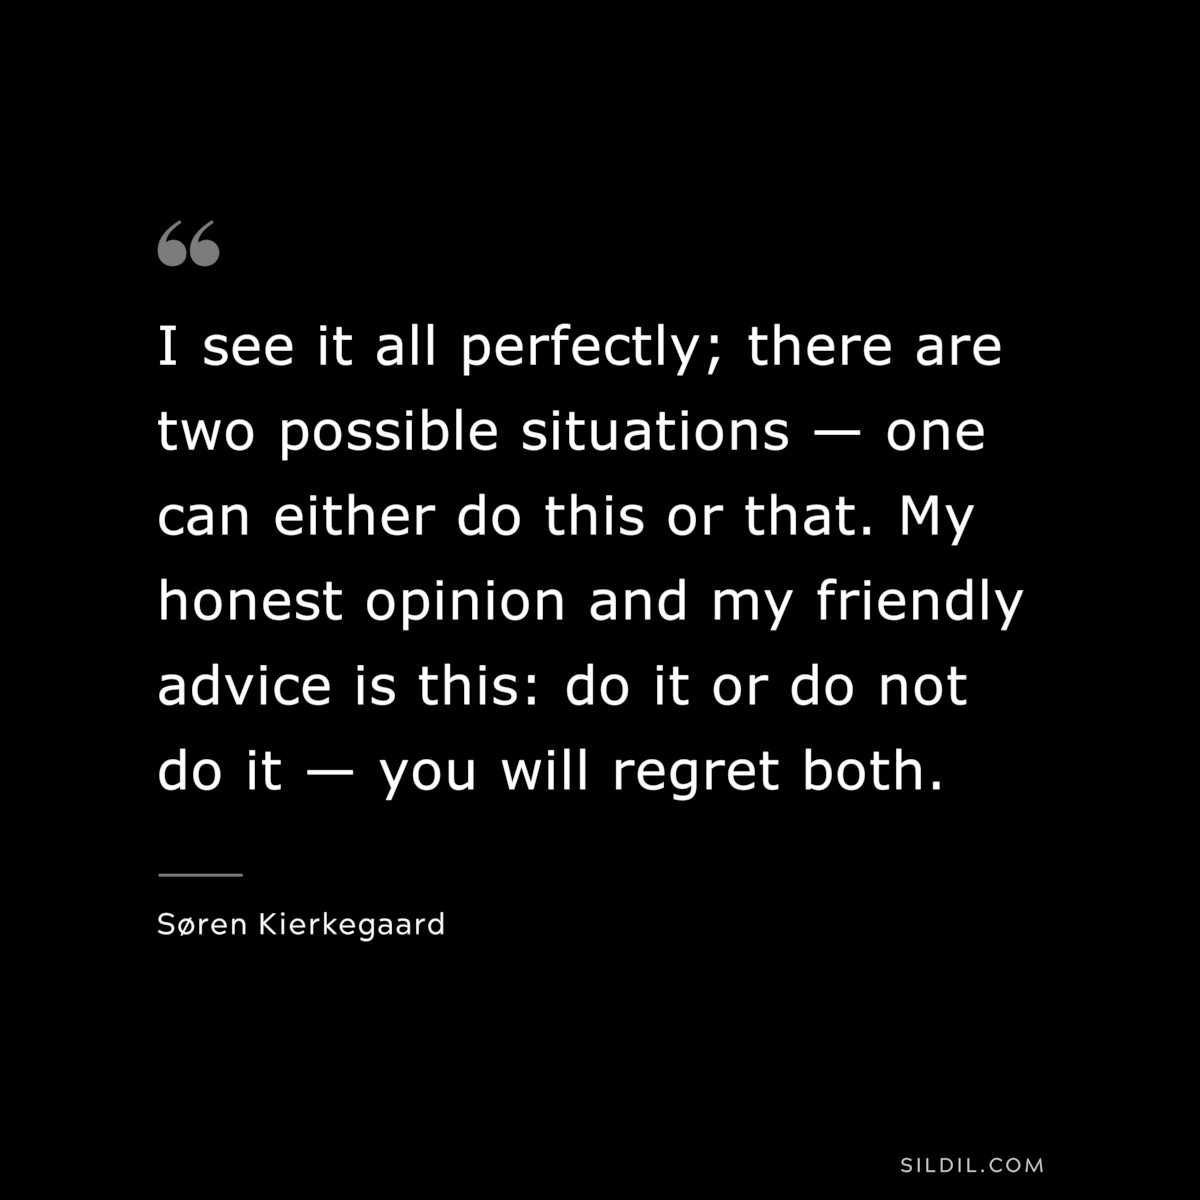 I see it all perfectly; there are two possible situations — one can either do this or that. My honest opinion and my friendly advice is this: do it or do not do it — you will regret both. ― Søren Kierkegaard